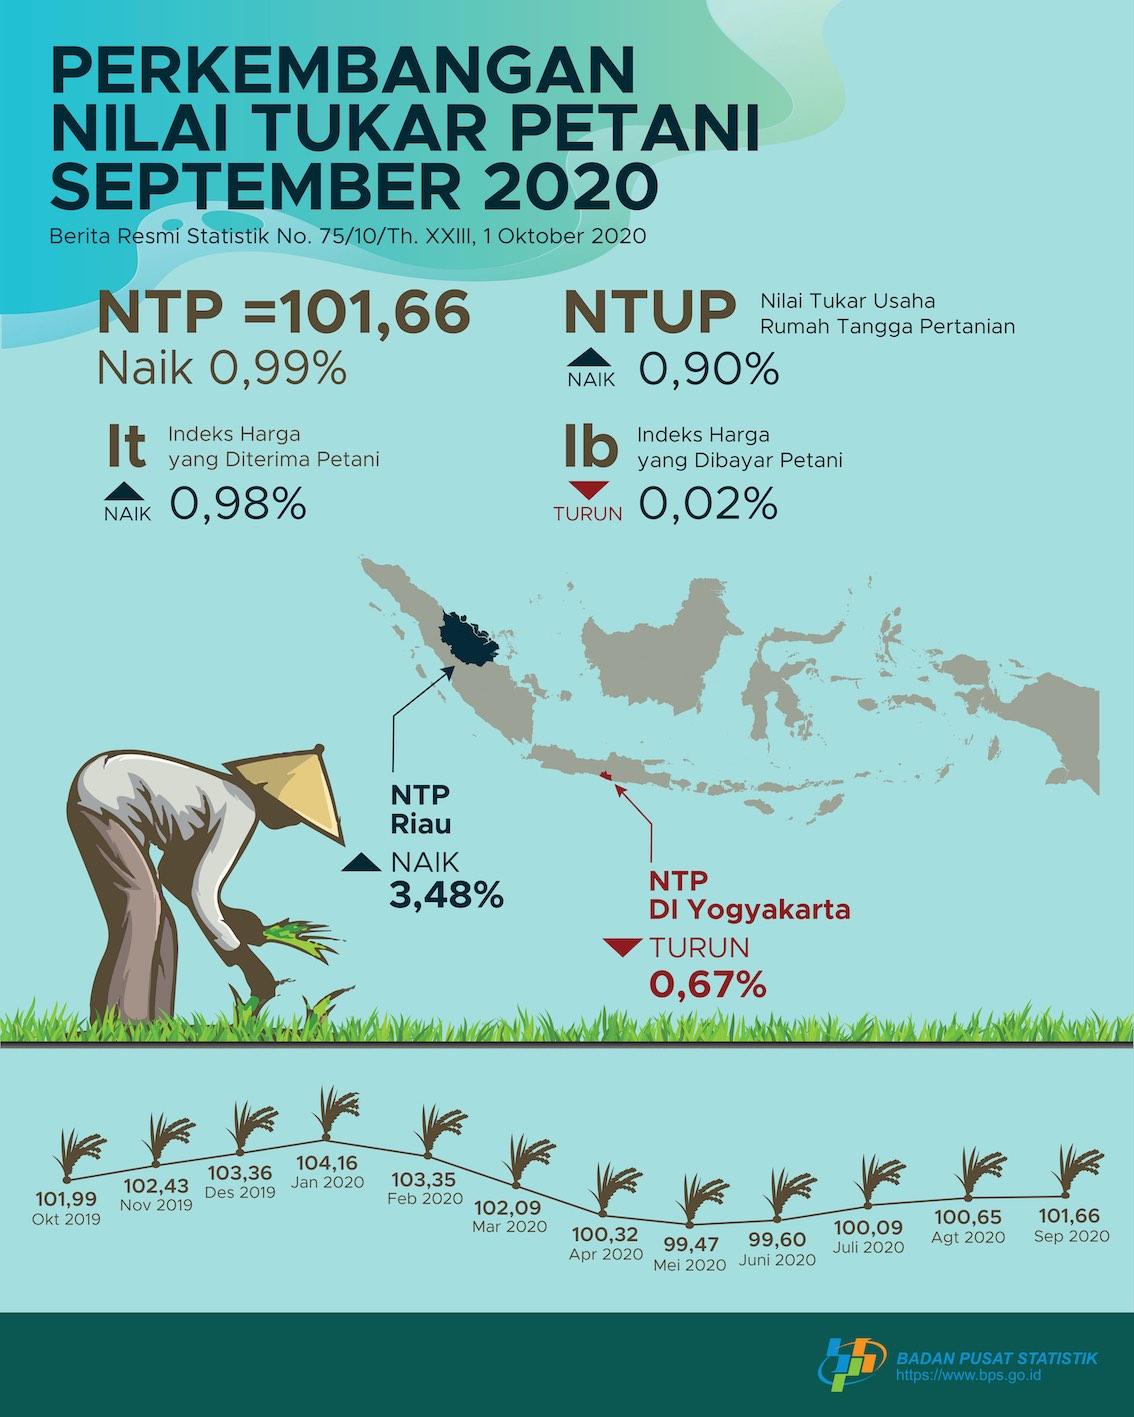 The Farmer Exchange Rate (NTP) September 2020 amounted to 101.66, an increase of 0.99 percent